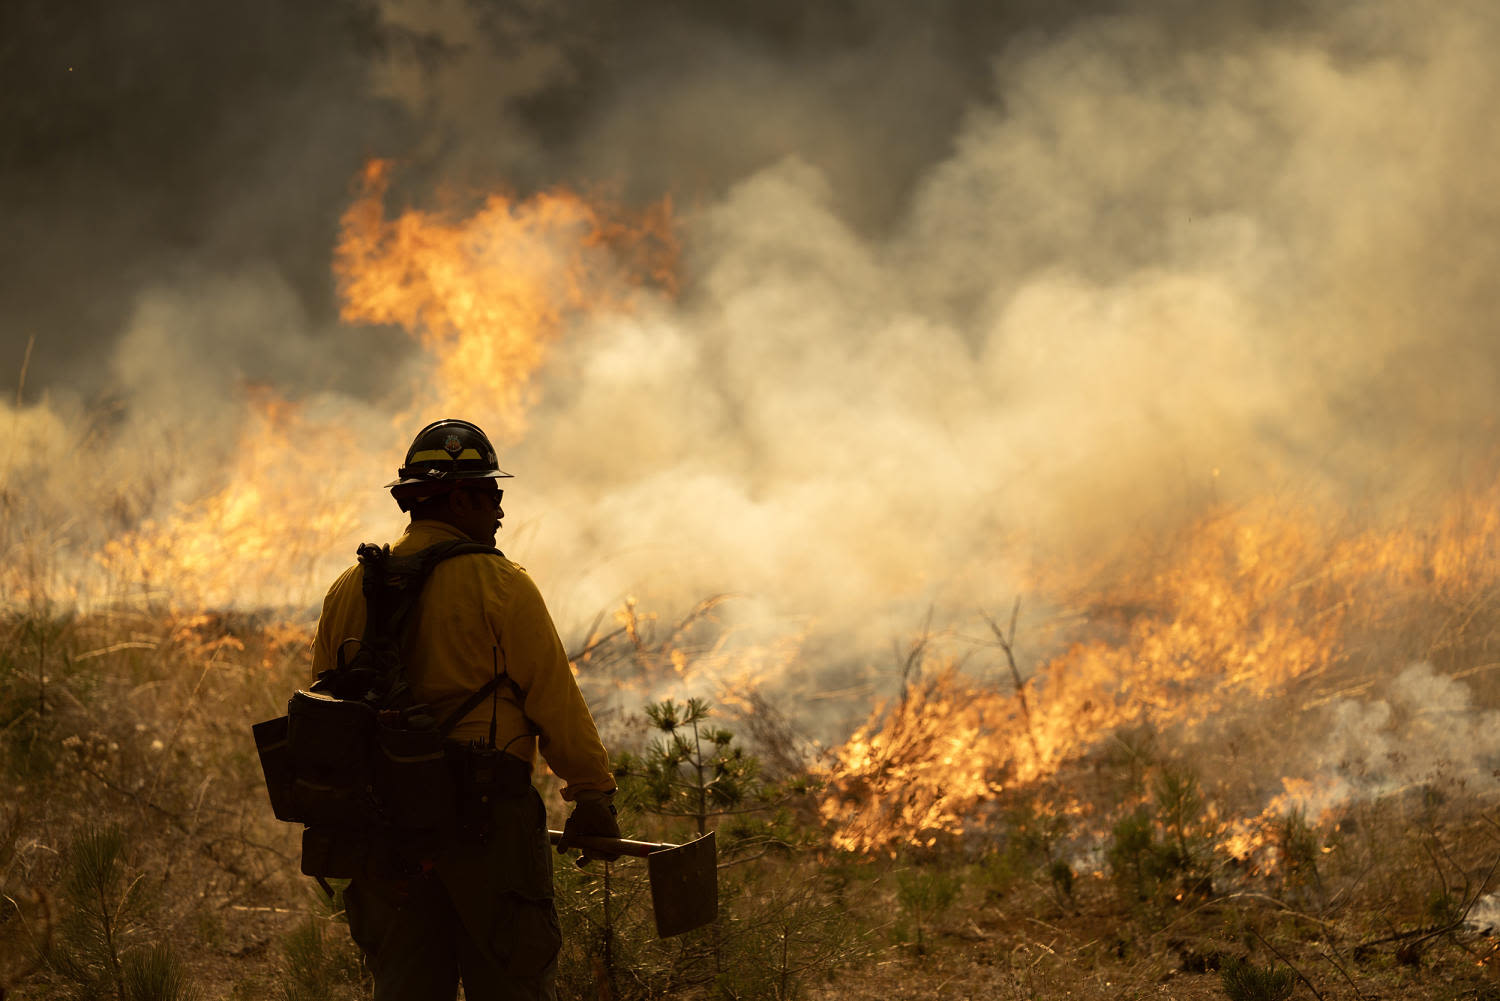 More than 726,000 acres burned as wildfires rage in California